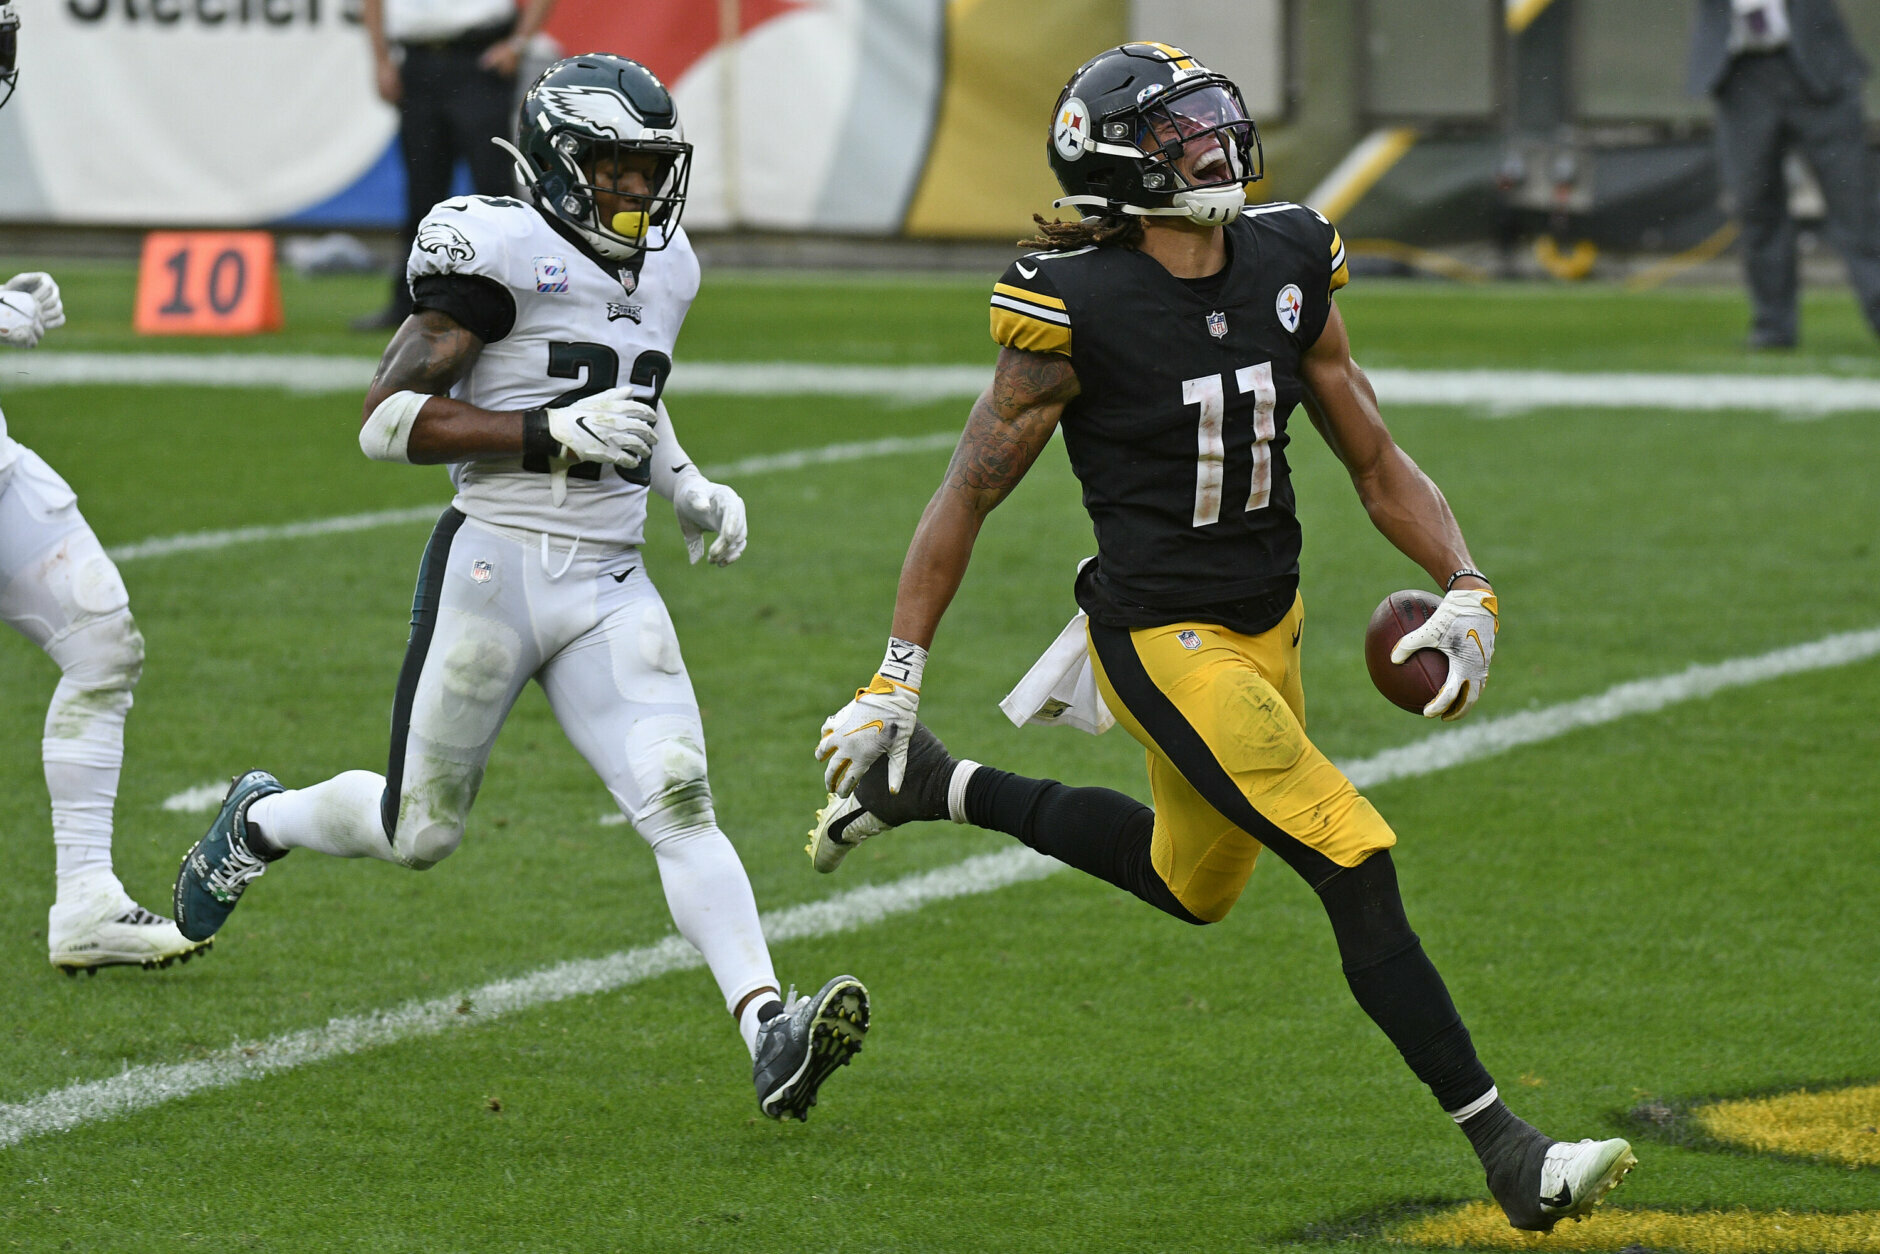 <p><b><i>Eagles 29</i></b><br />
<b><i>Steelers 38</i></b></p>
<p>Pittsburgh is 4-0 for the first time since its Super Bowl season in 1979, and only Gale Sayers had more touchdowns in a game as a rookie than Chase Claypool&#8217;s 4-TD performance. With apologies to the defending champion Chiefs, the Steelers-Ravens rivalry will have more influence on the AFC playoff picture.</p>
